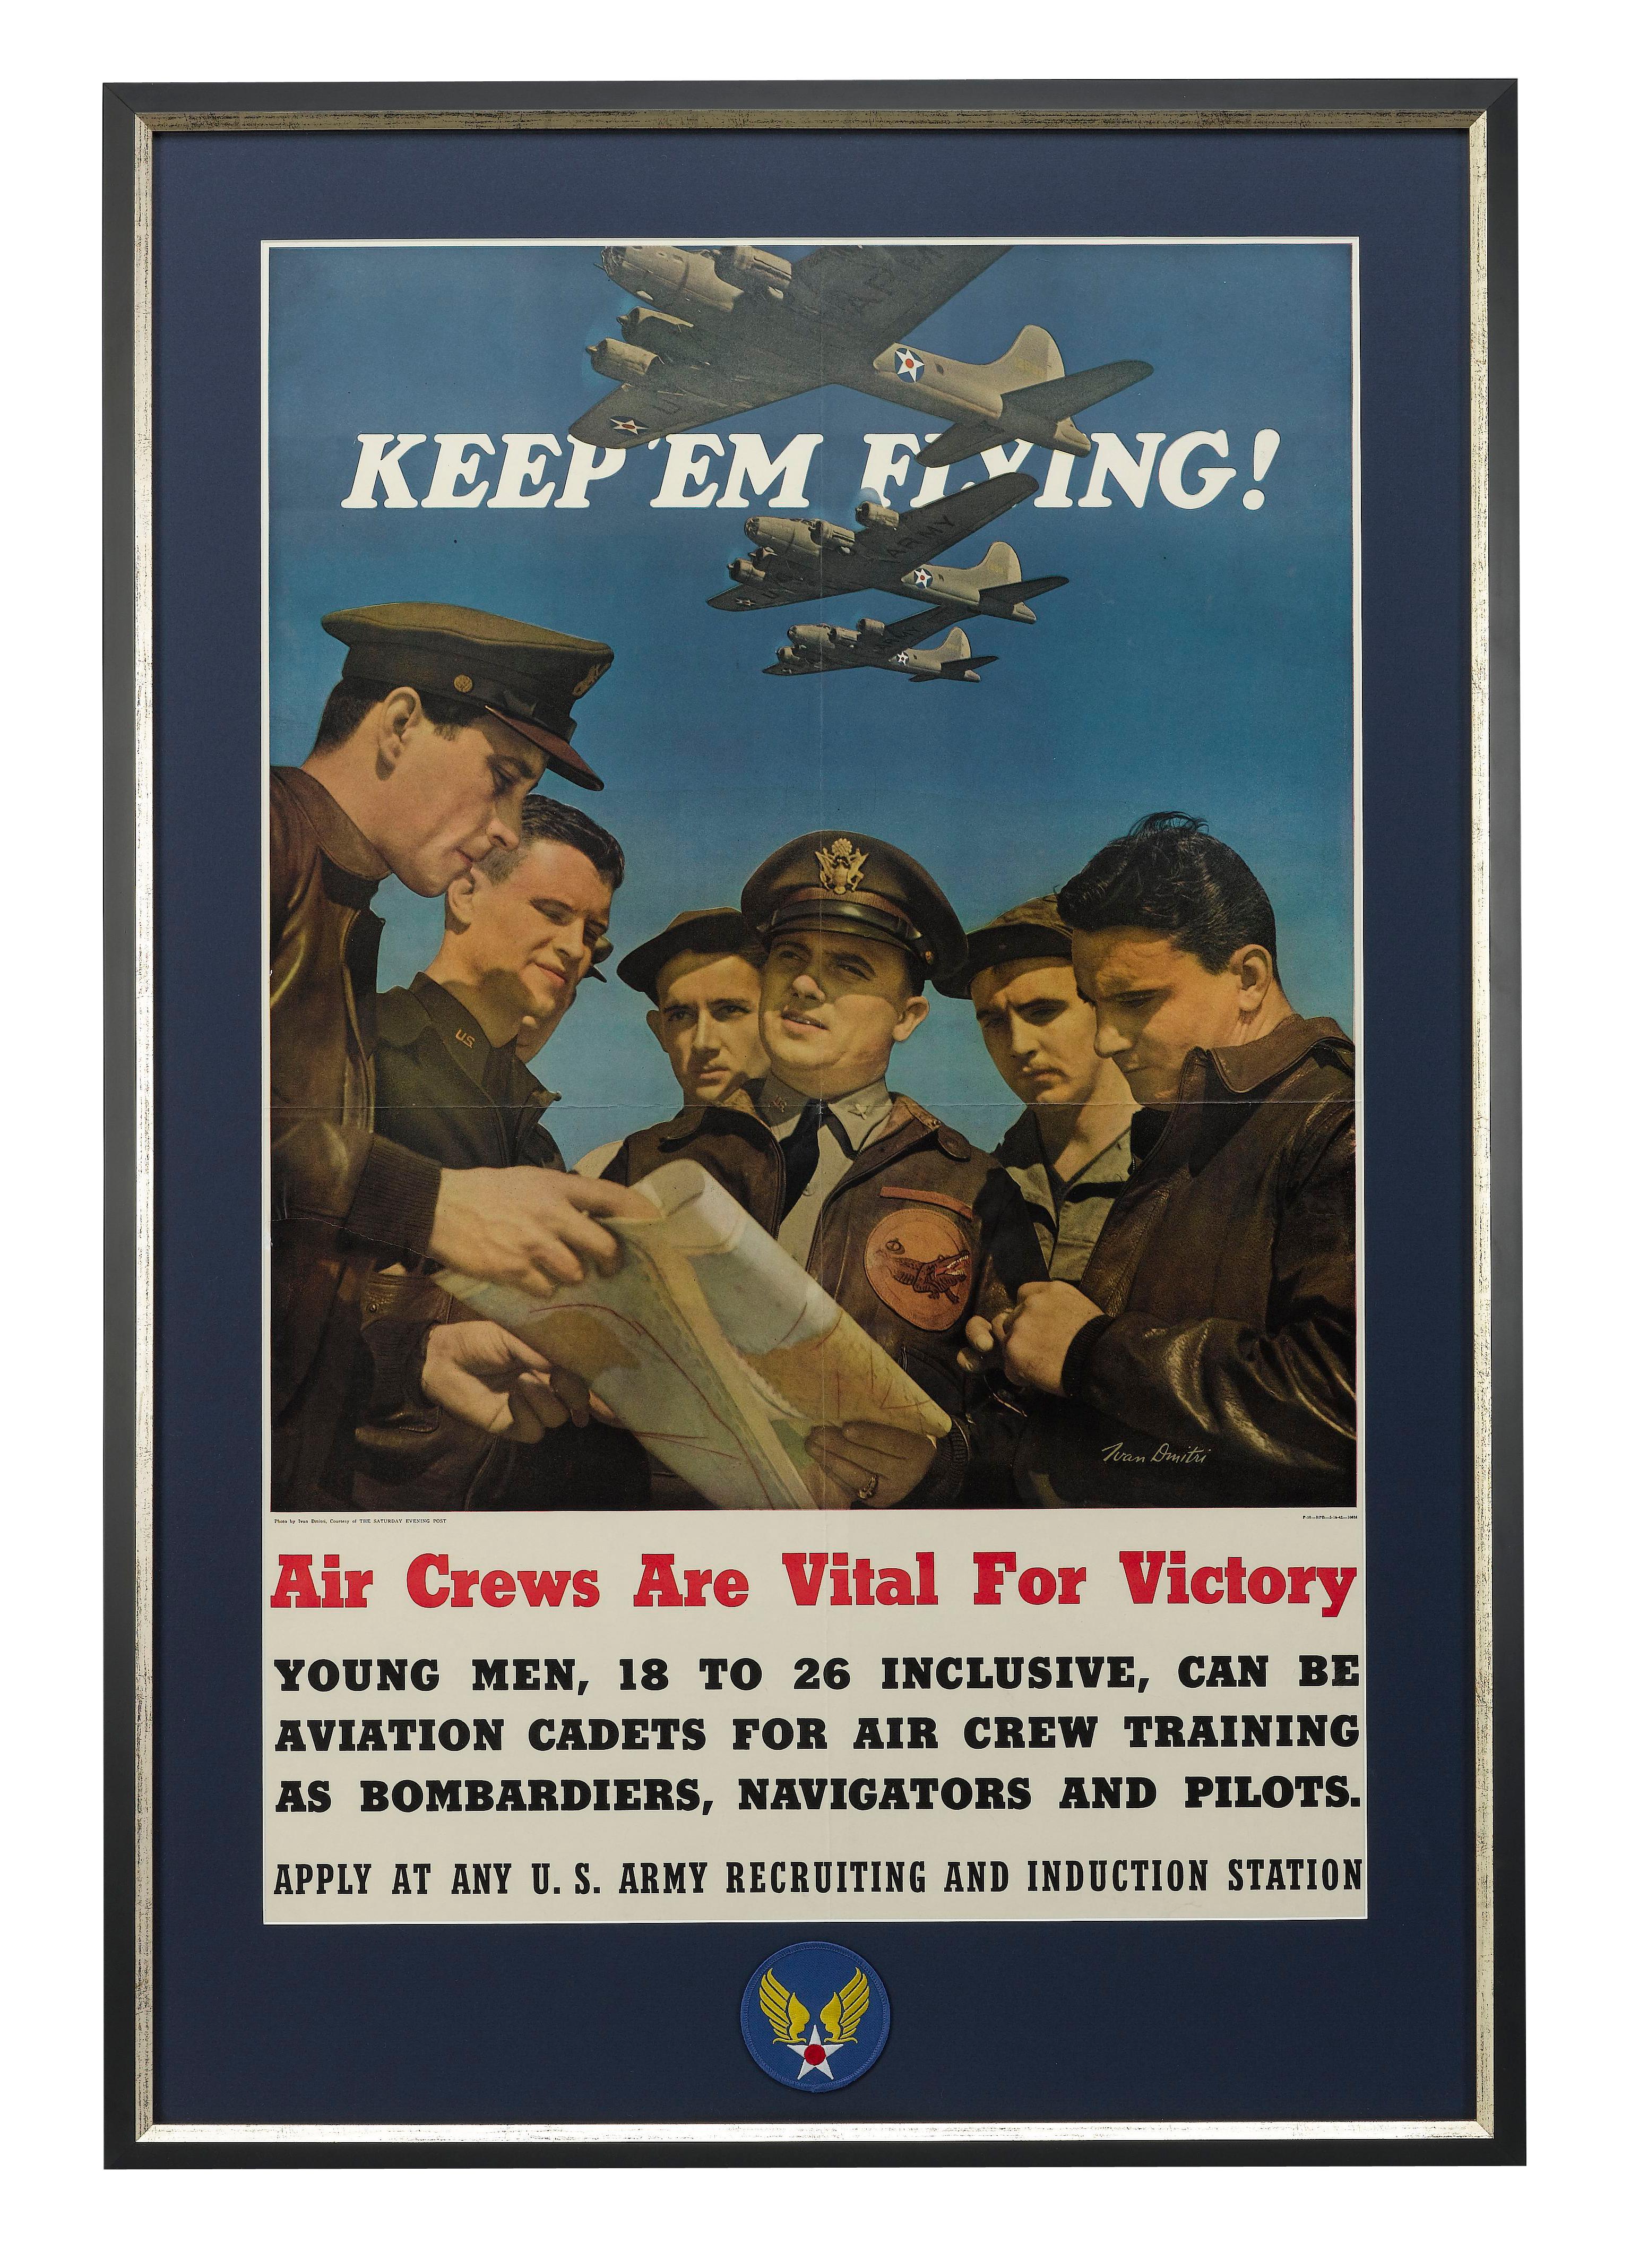 This Army Air Corps recruitment poster, by Ivan Dmitri, was issued in 1942 in order to entice new enlistees amidst World War II. Bearing the popular slogan, “Keep ‘Em Flying!” in large white block letters near the top, the rest of the poster reads,